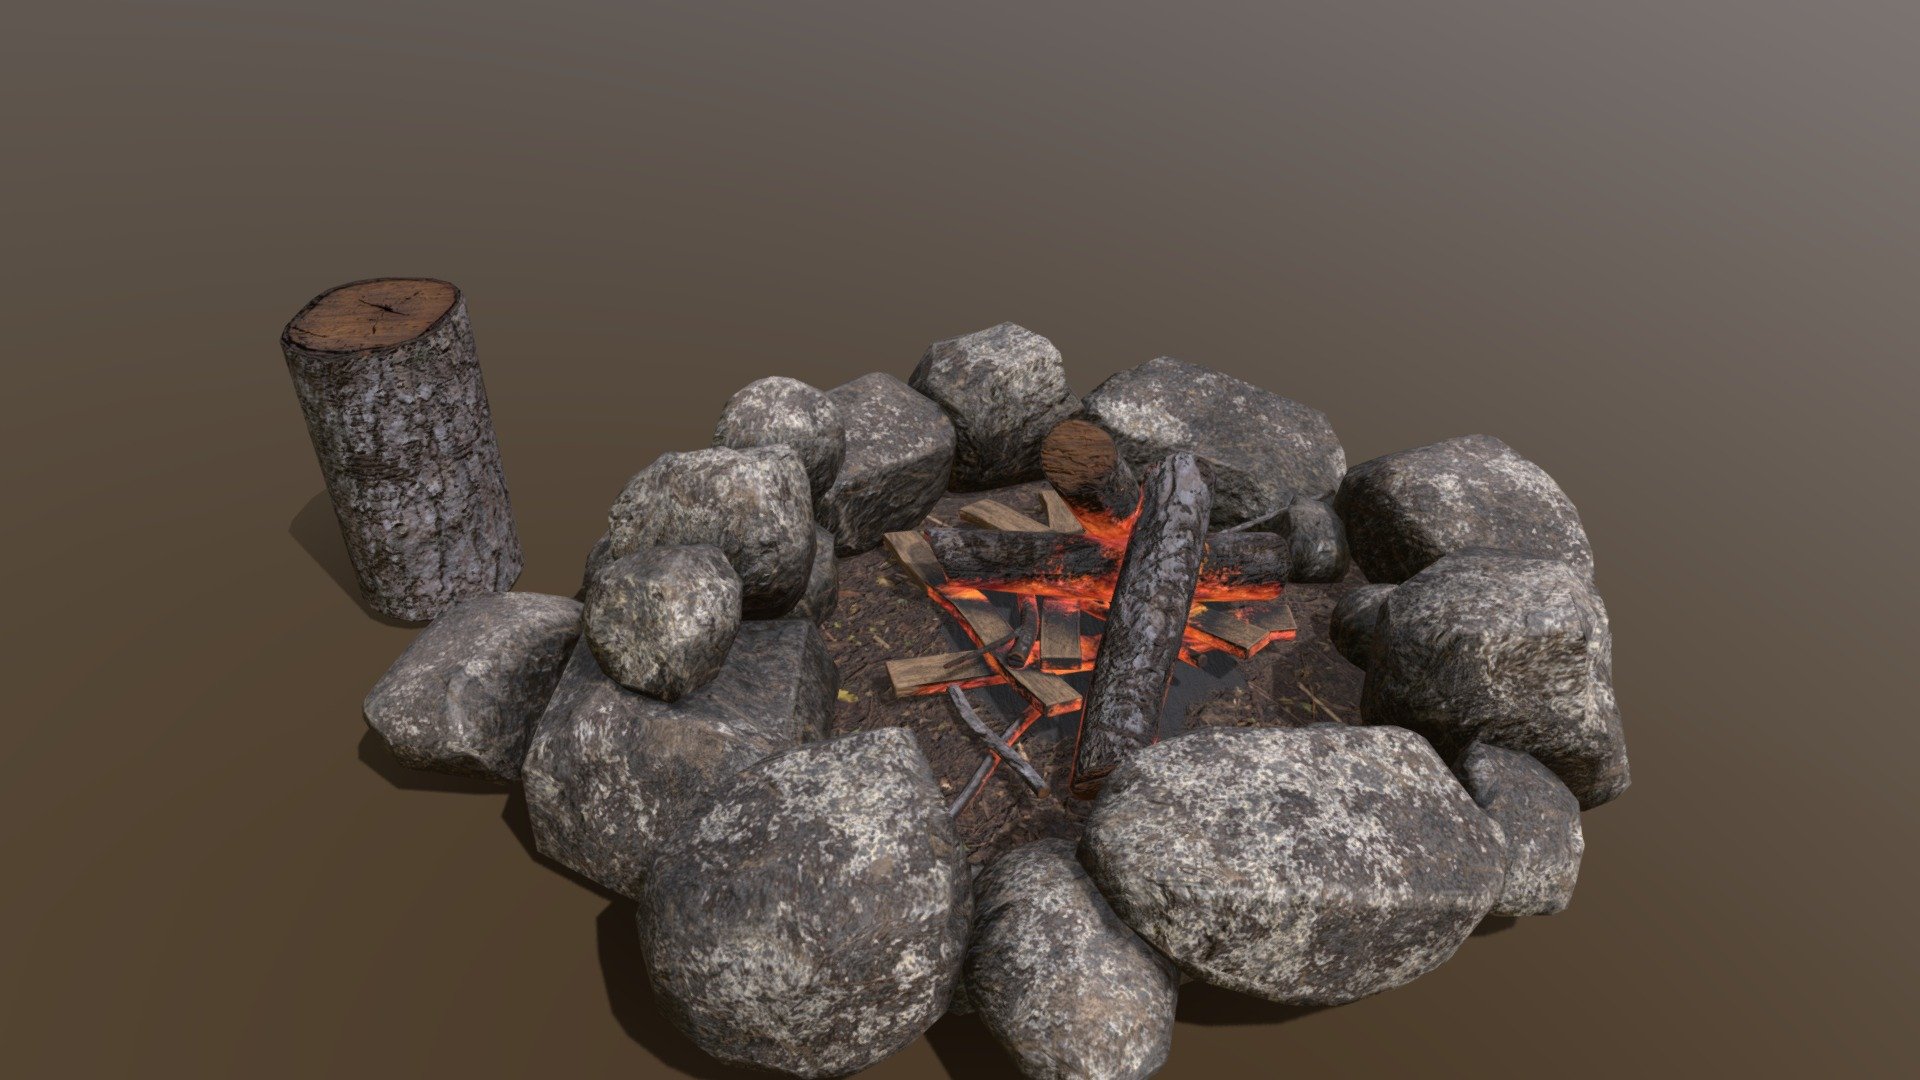 Old Viking Small Fire Pit 3D Model. This model contains the Small Fire Pit itself

All modeled in Maya, textured with Substance Painter.

The model was built to scale and is UV unwrapped properly. Contains only one 4K texture set.

⦁ 7858 tris.

⦁ Contains: .FBX .OBJ and .DAE

⦁ Model has clean topology. No Ngons.

⦁ Built to scale

⦁ Unwrapped UV Map

⦁ 4K Texture set

⦁ High quality details

⦁ Based on real life references

⦁ Renders done in Marmoset Toolbag

Polycount:

verts 4047

edges 8076

faces 4097

tris 7858

If you have any questions please feel free to ask me 3d model